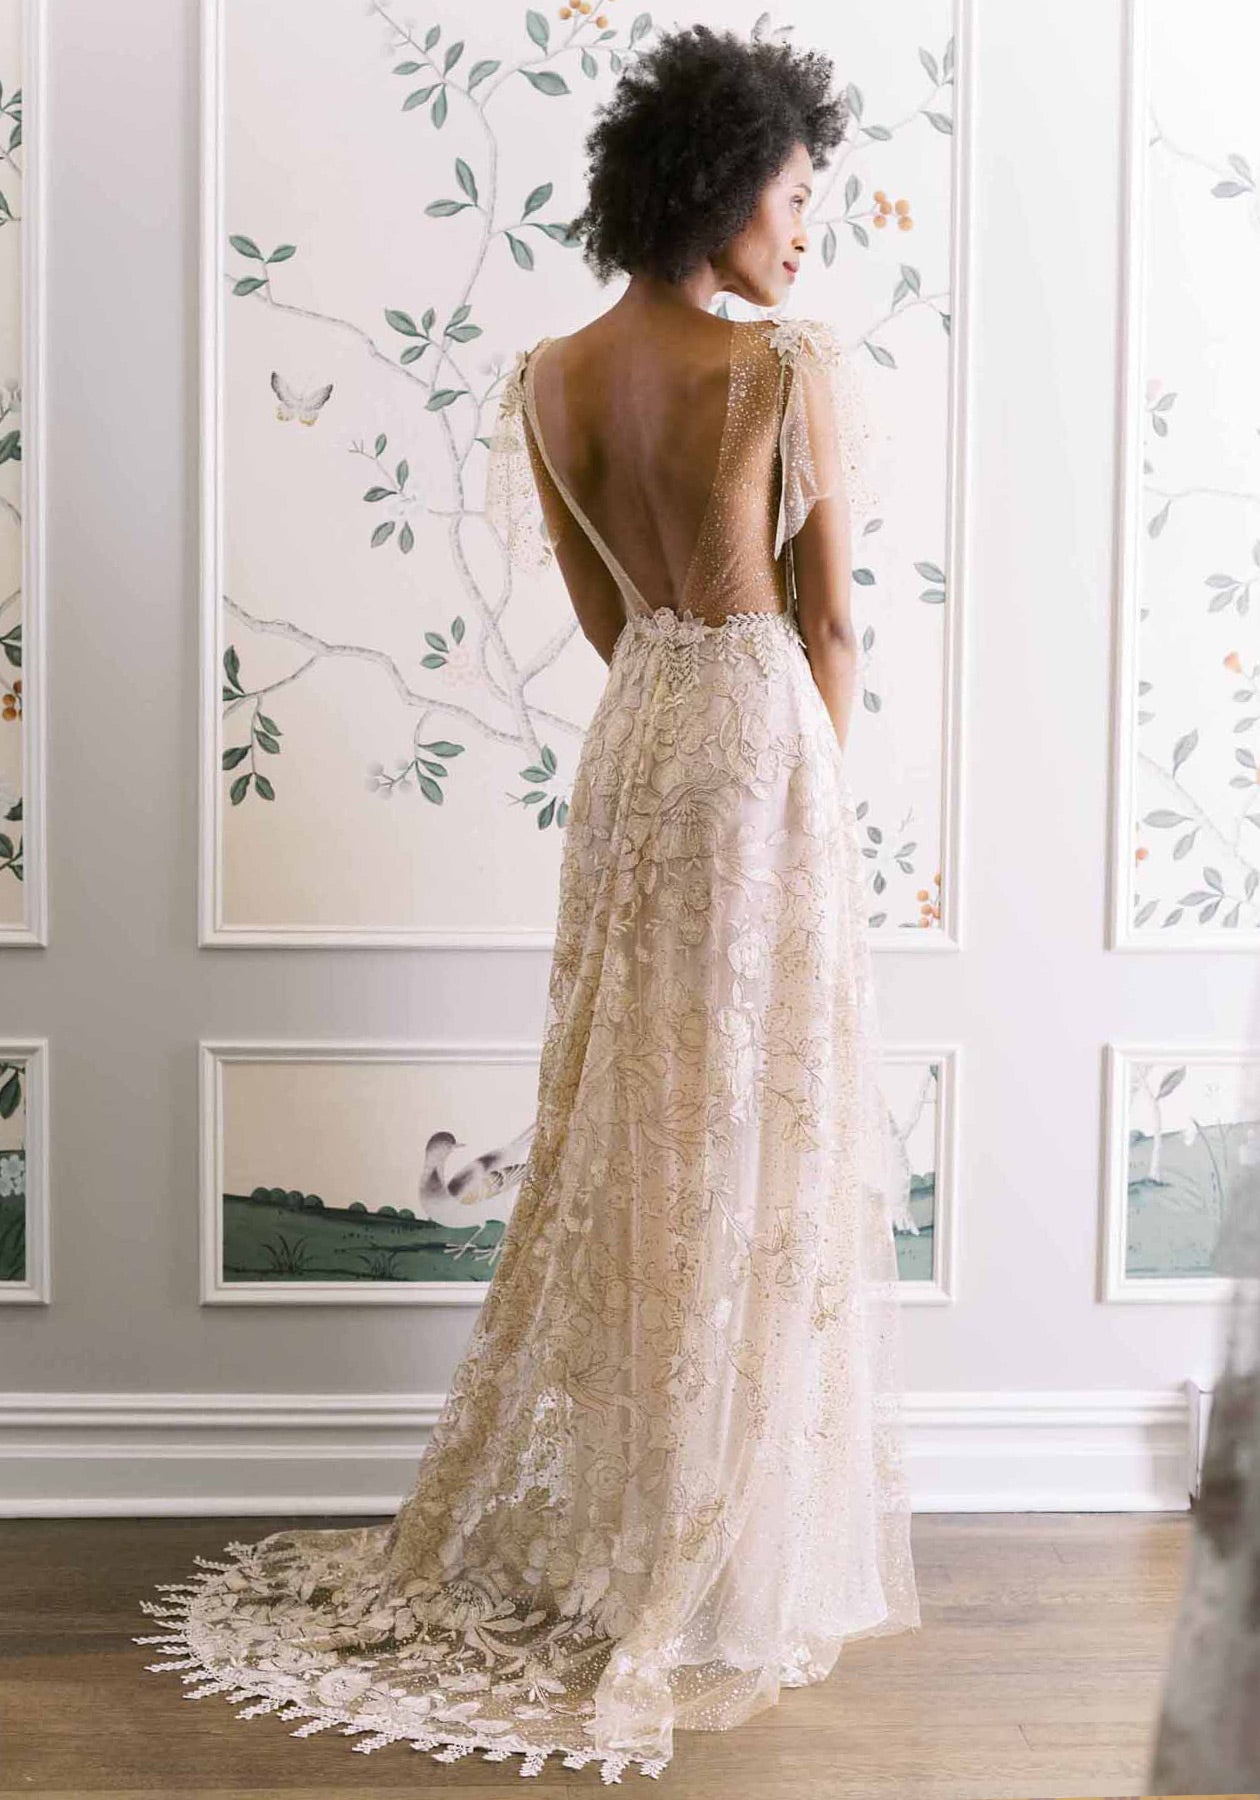 Backless Wedding Dresses : 15 Great Ideas For You